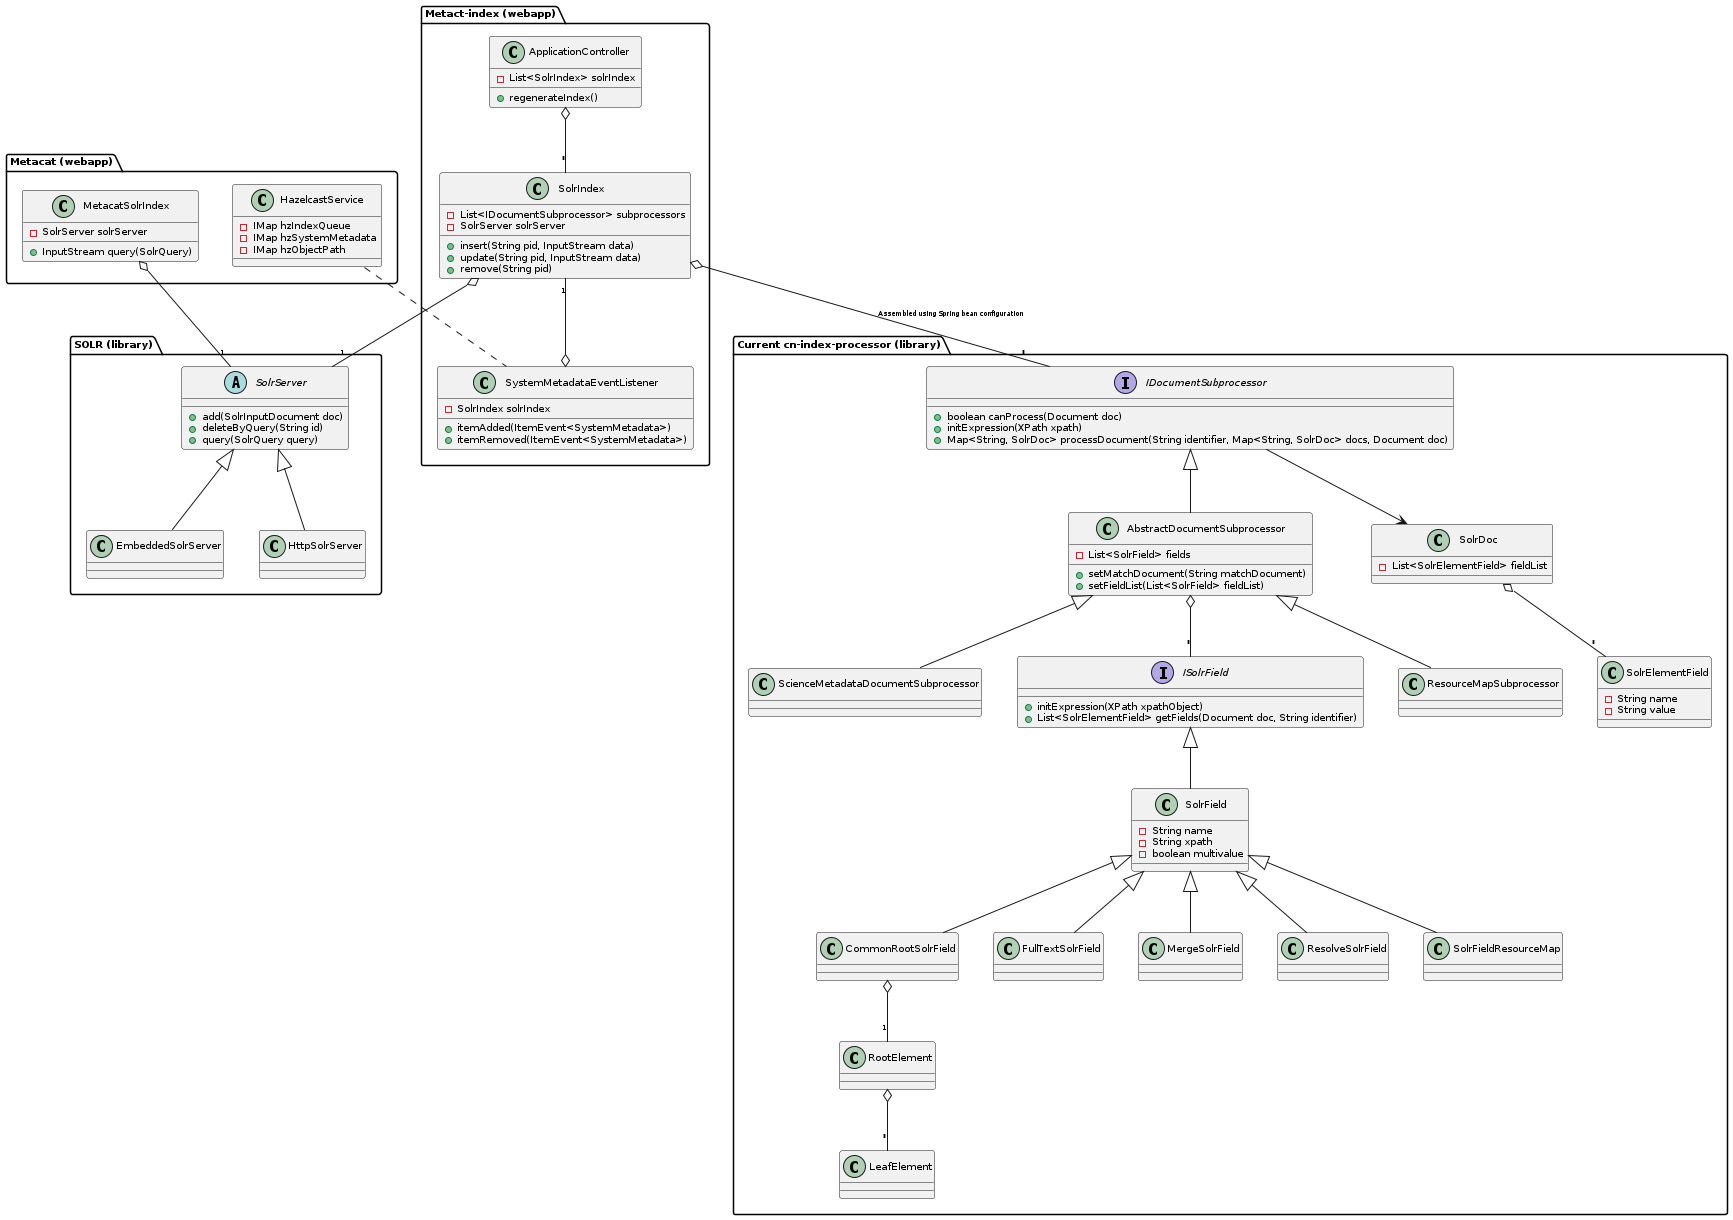 _images/indexing-class-diagram.png